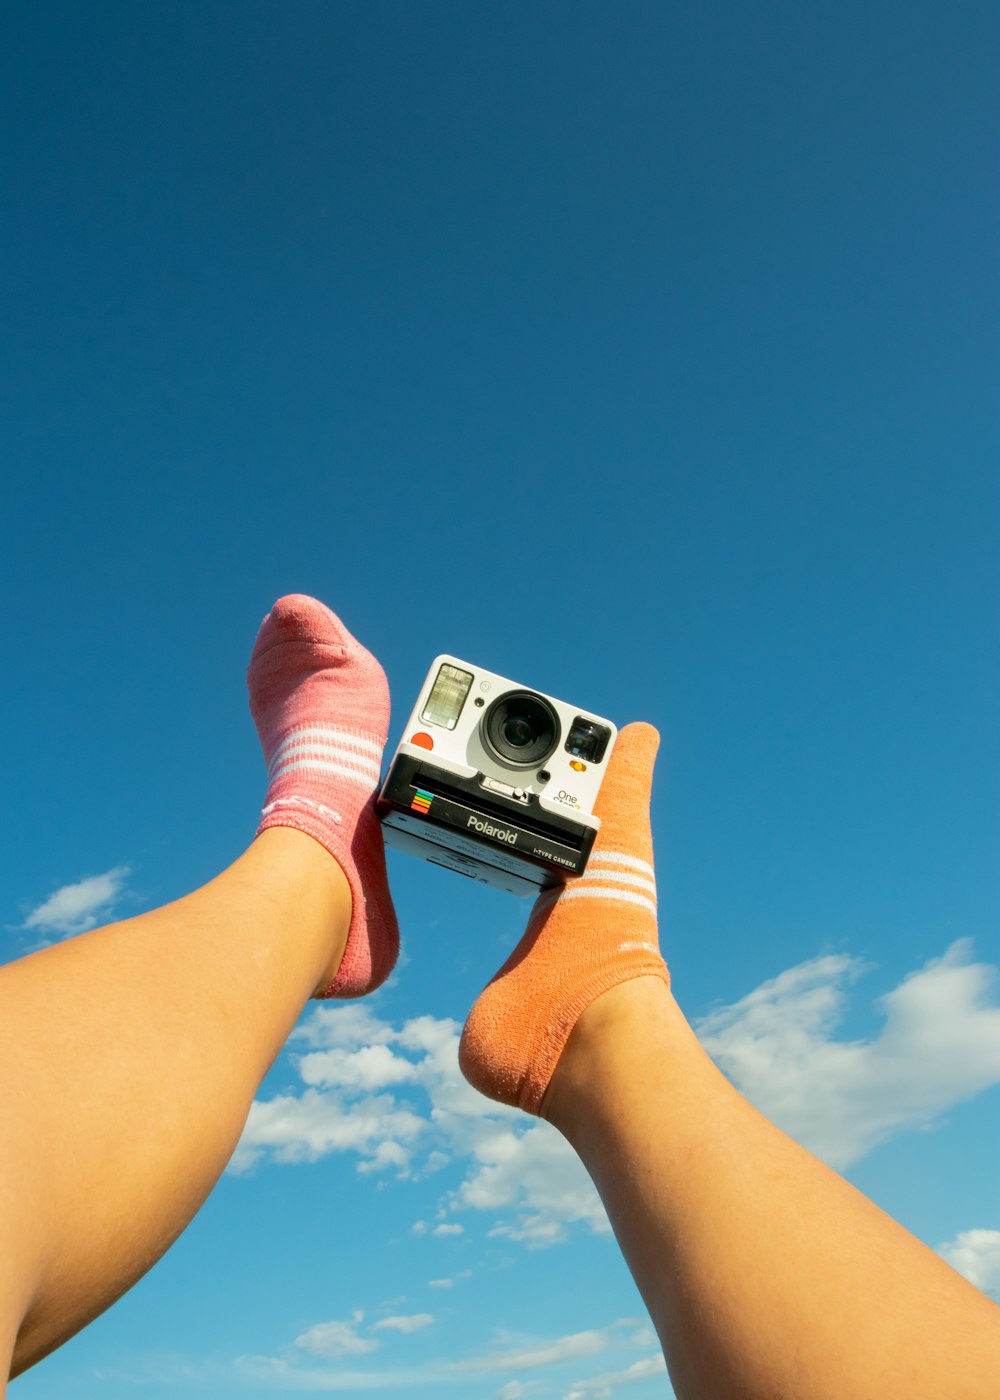 person holding white and black camera under blue sky during daytime